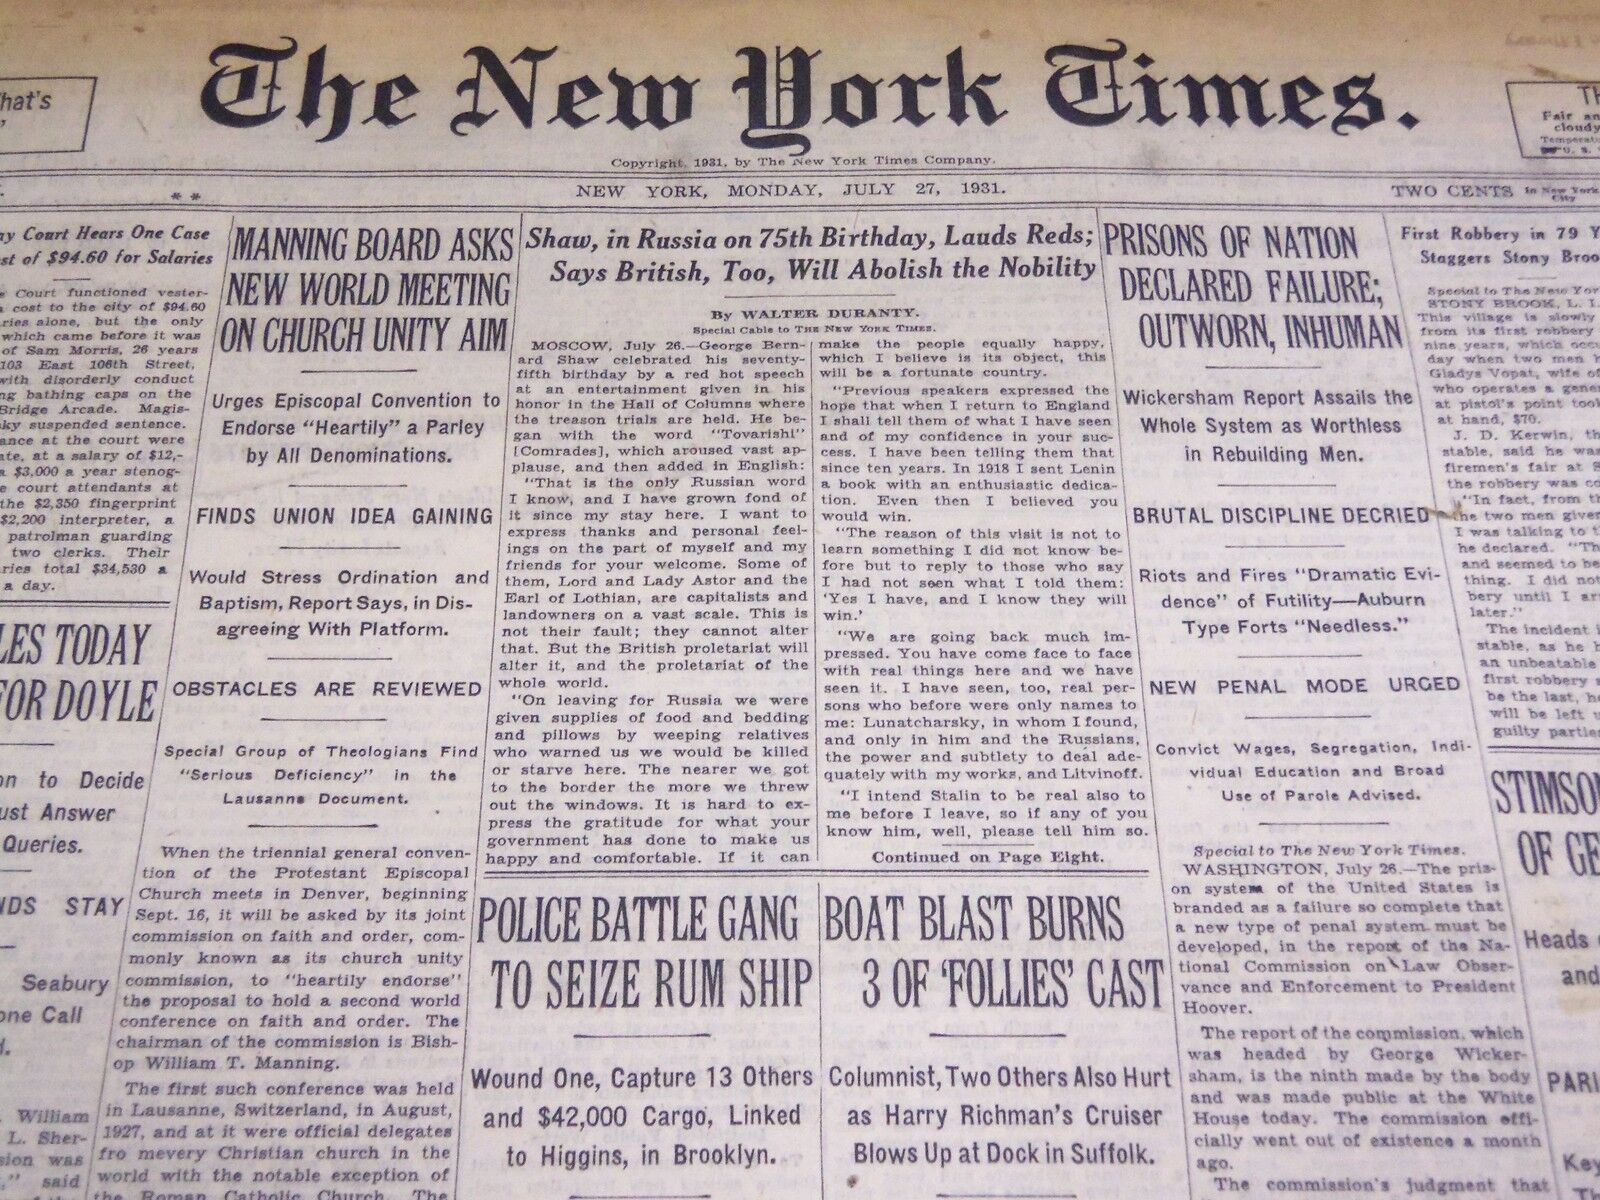 1931 JULY 27 NEW YORK TIMES - SHAW IN RUSSIA ON 75TH BIRTHDAY - NT 2167